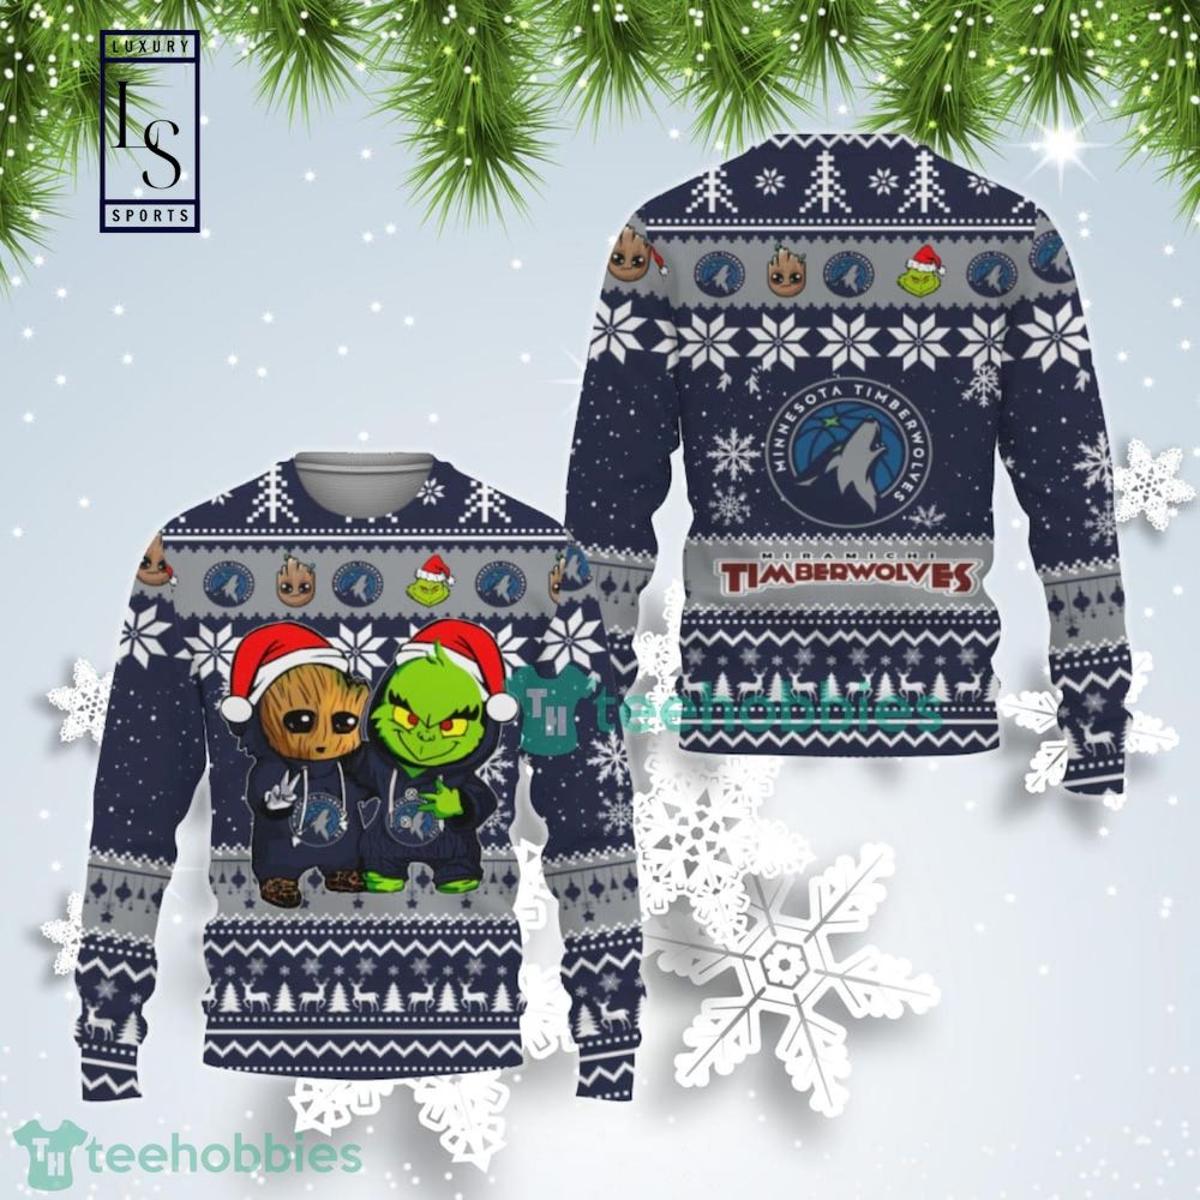 Minnesota Timberwolves Baby Groot And Grinch Ugly Christmas Sweater Gift